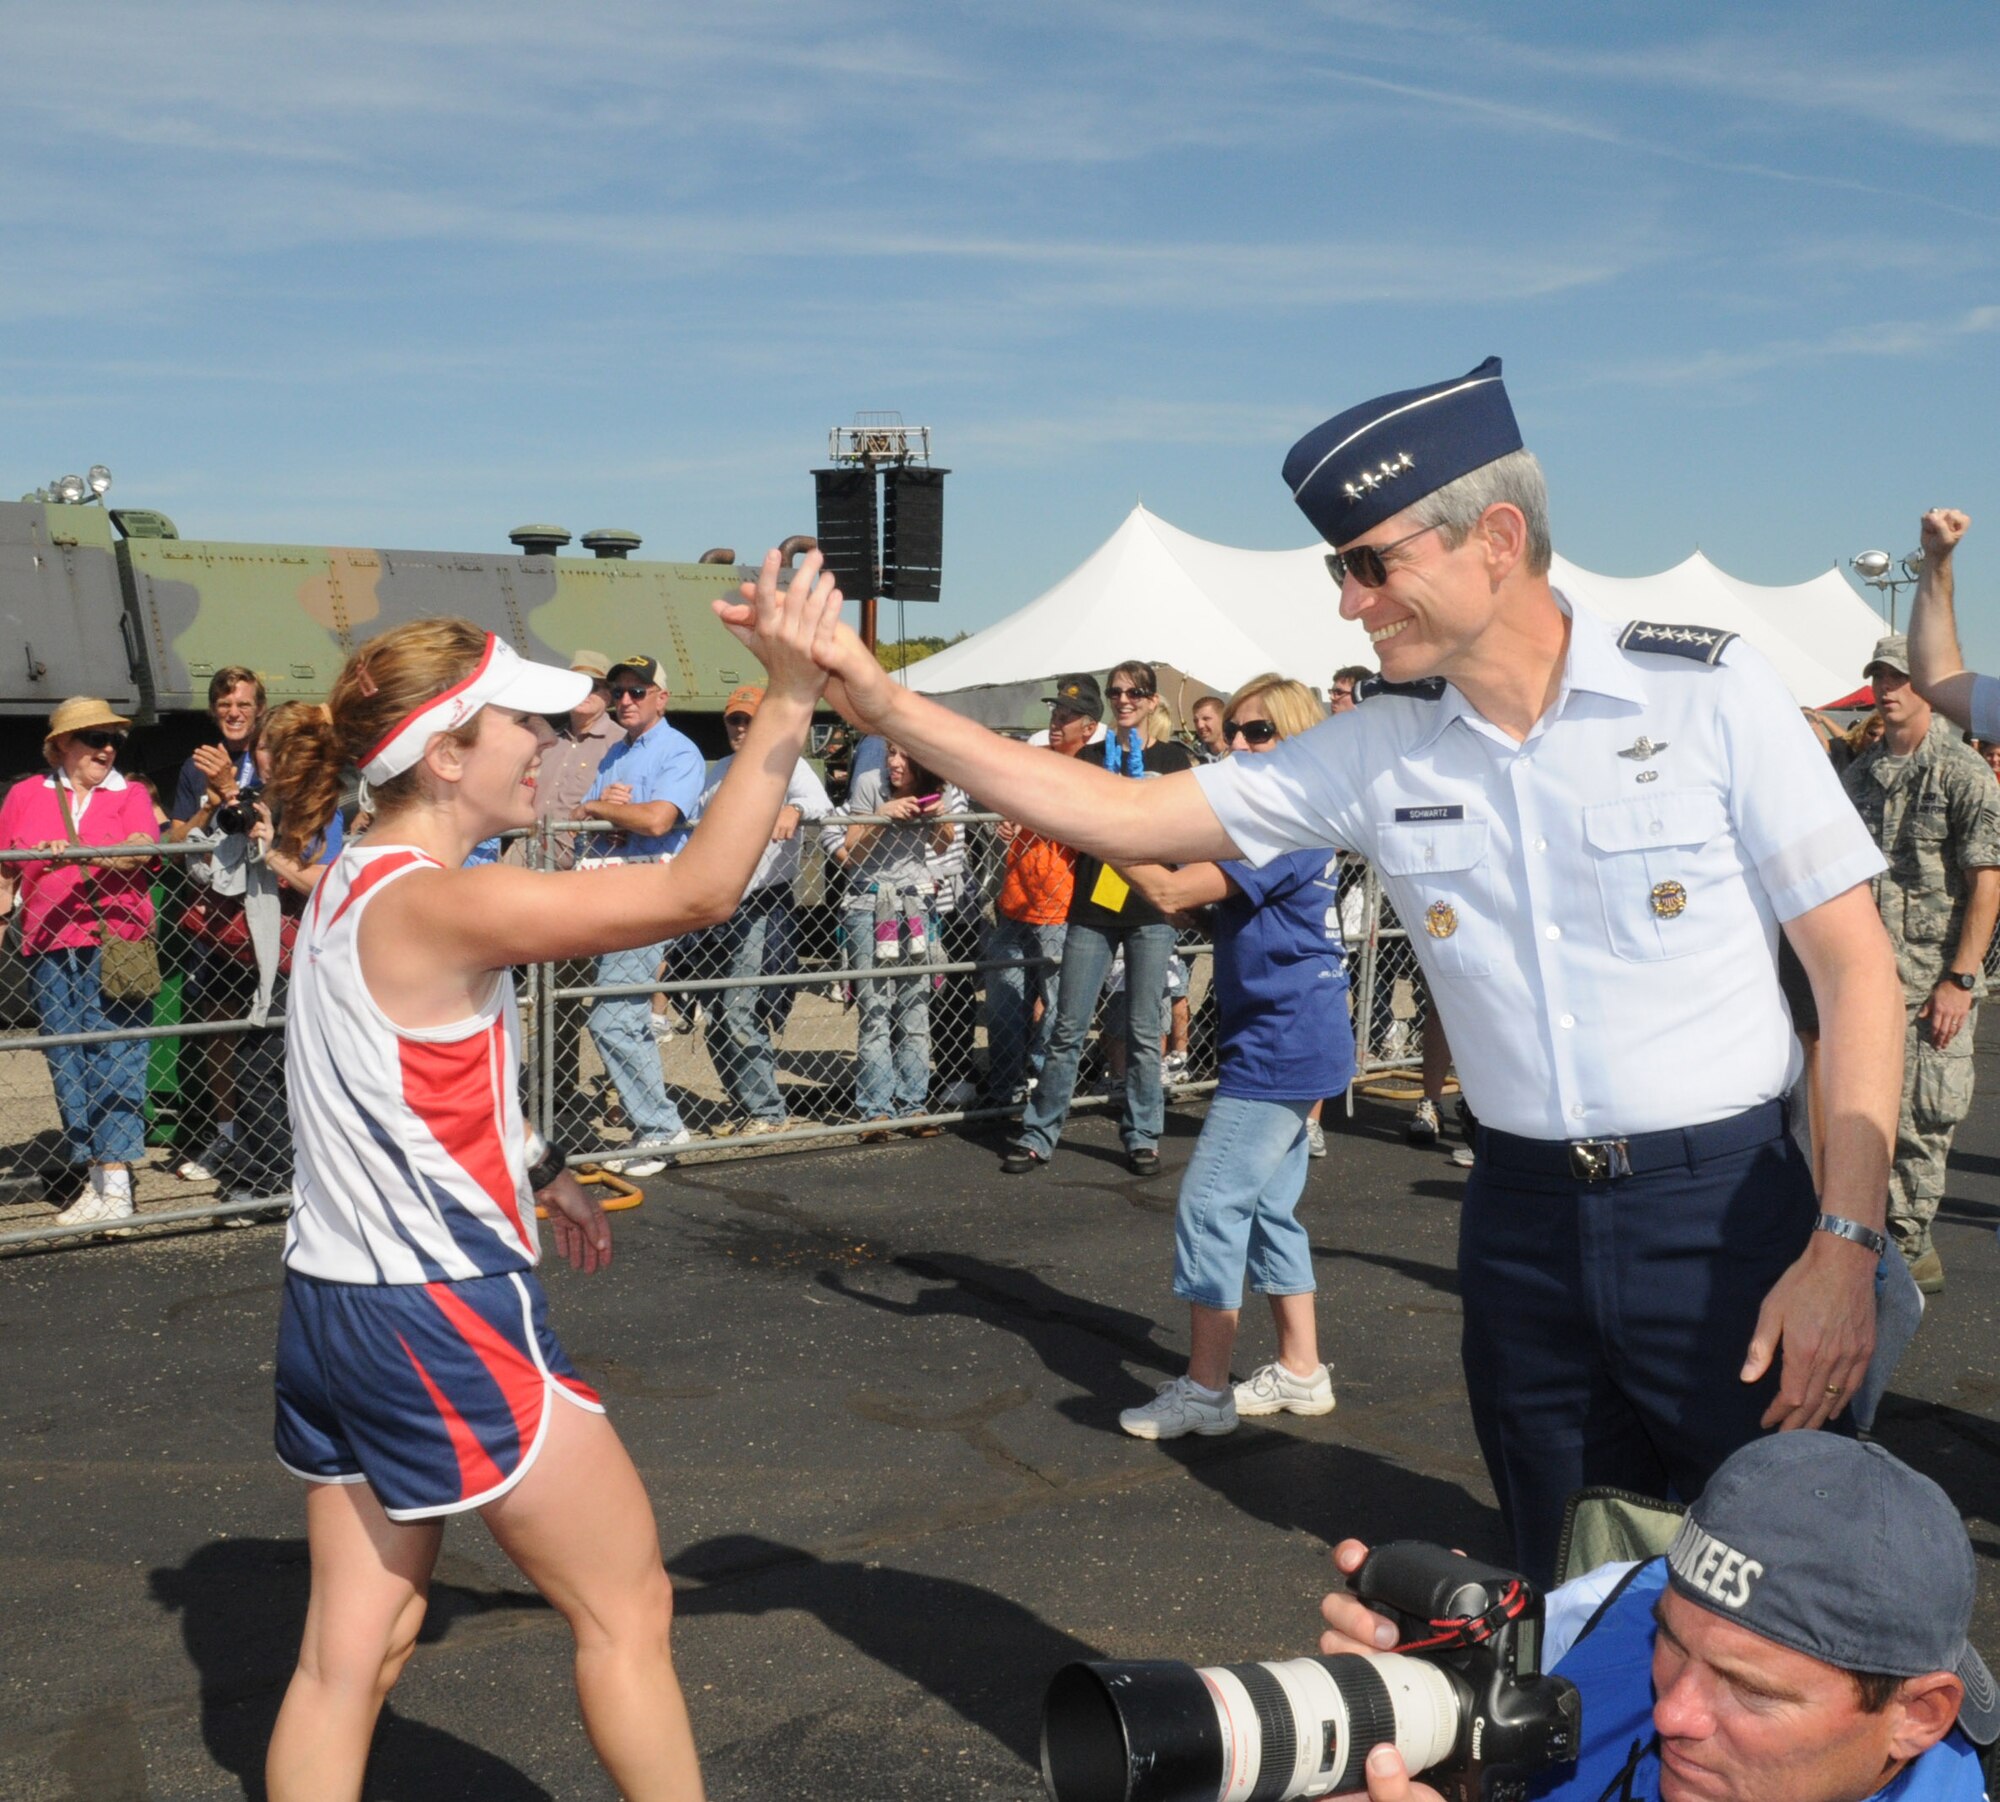 Gen. Norton Schwartz, Air Force Chief of Staff, gives a high five to one of the full marathon runners crossing the finish line.  (US Air Force photo by Al Bright)